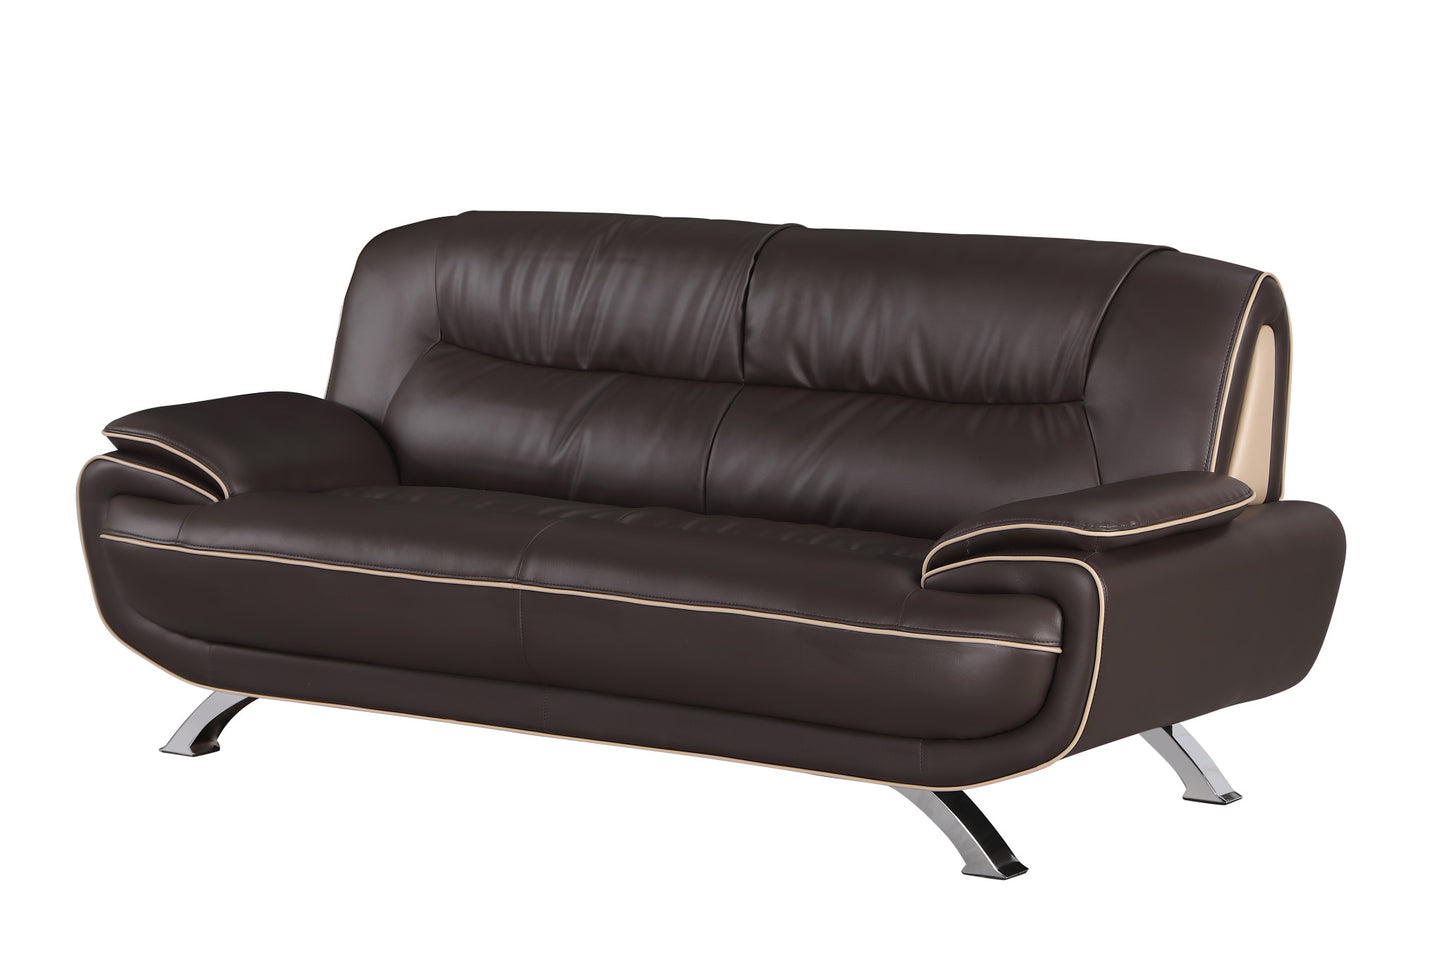 80" Brown And Silver Leather Sofa